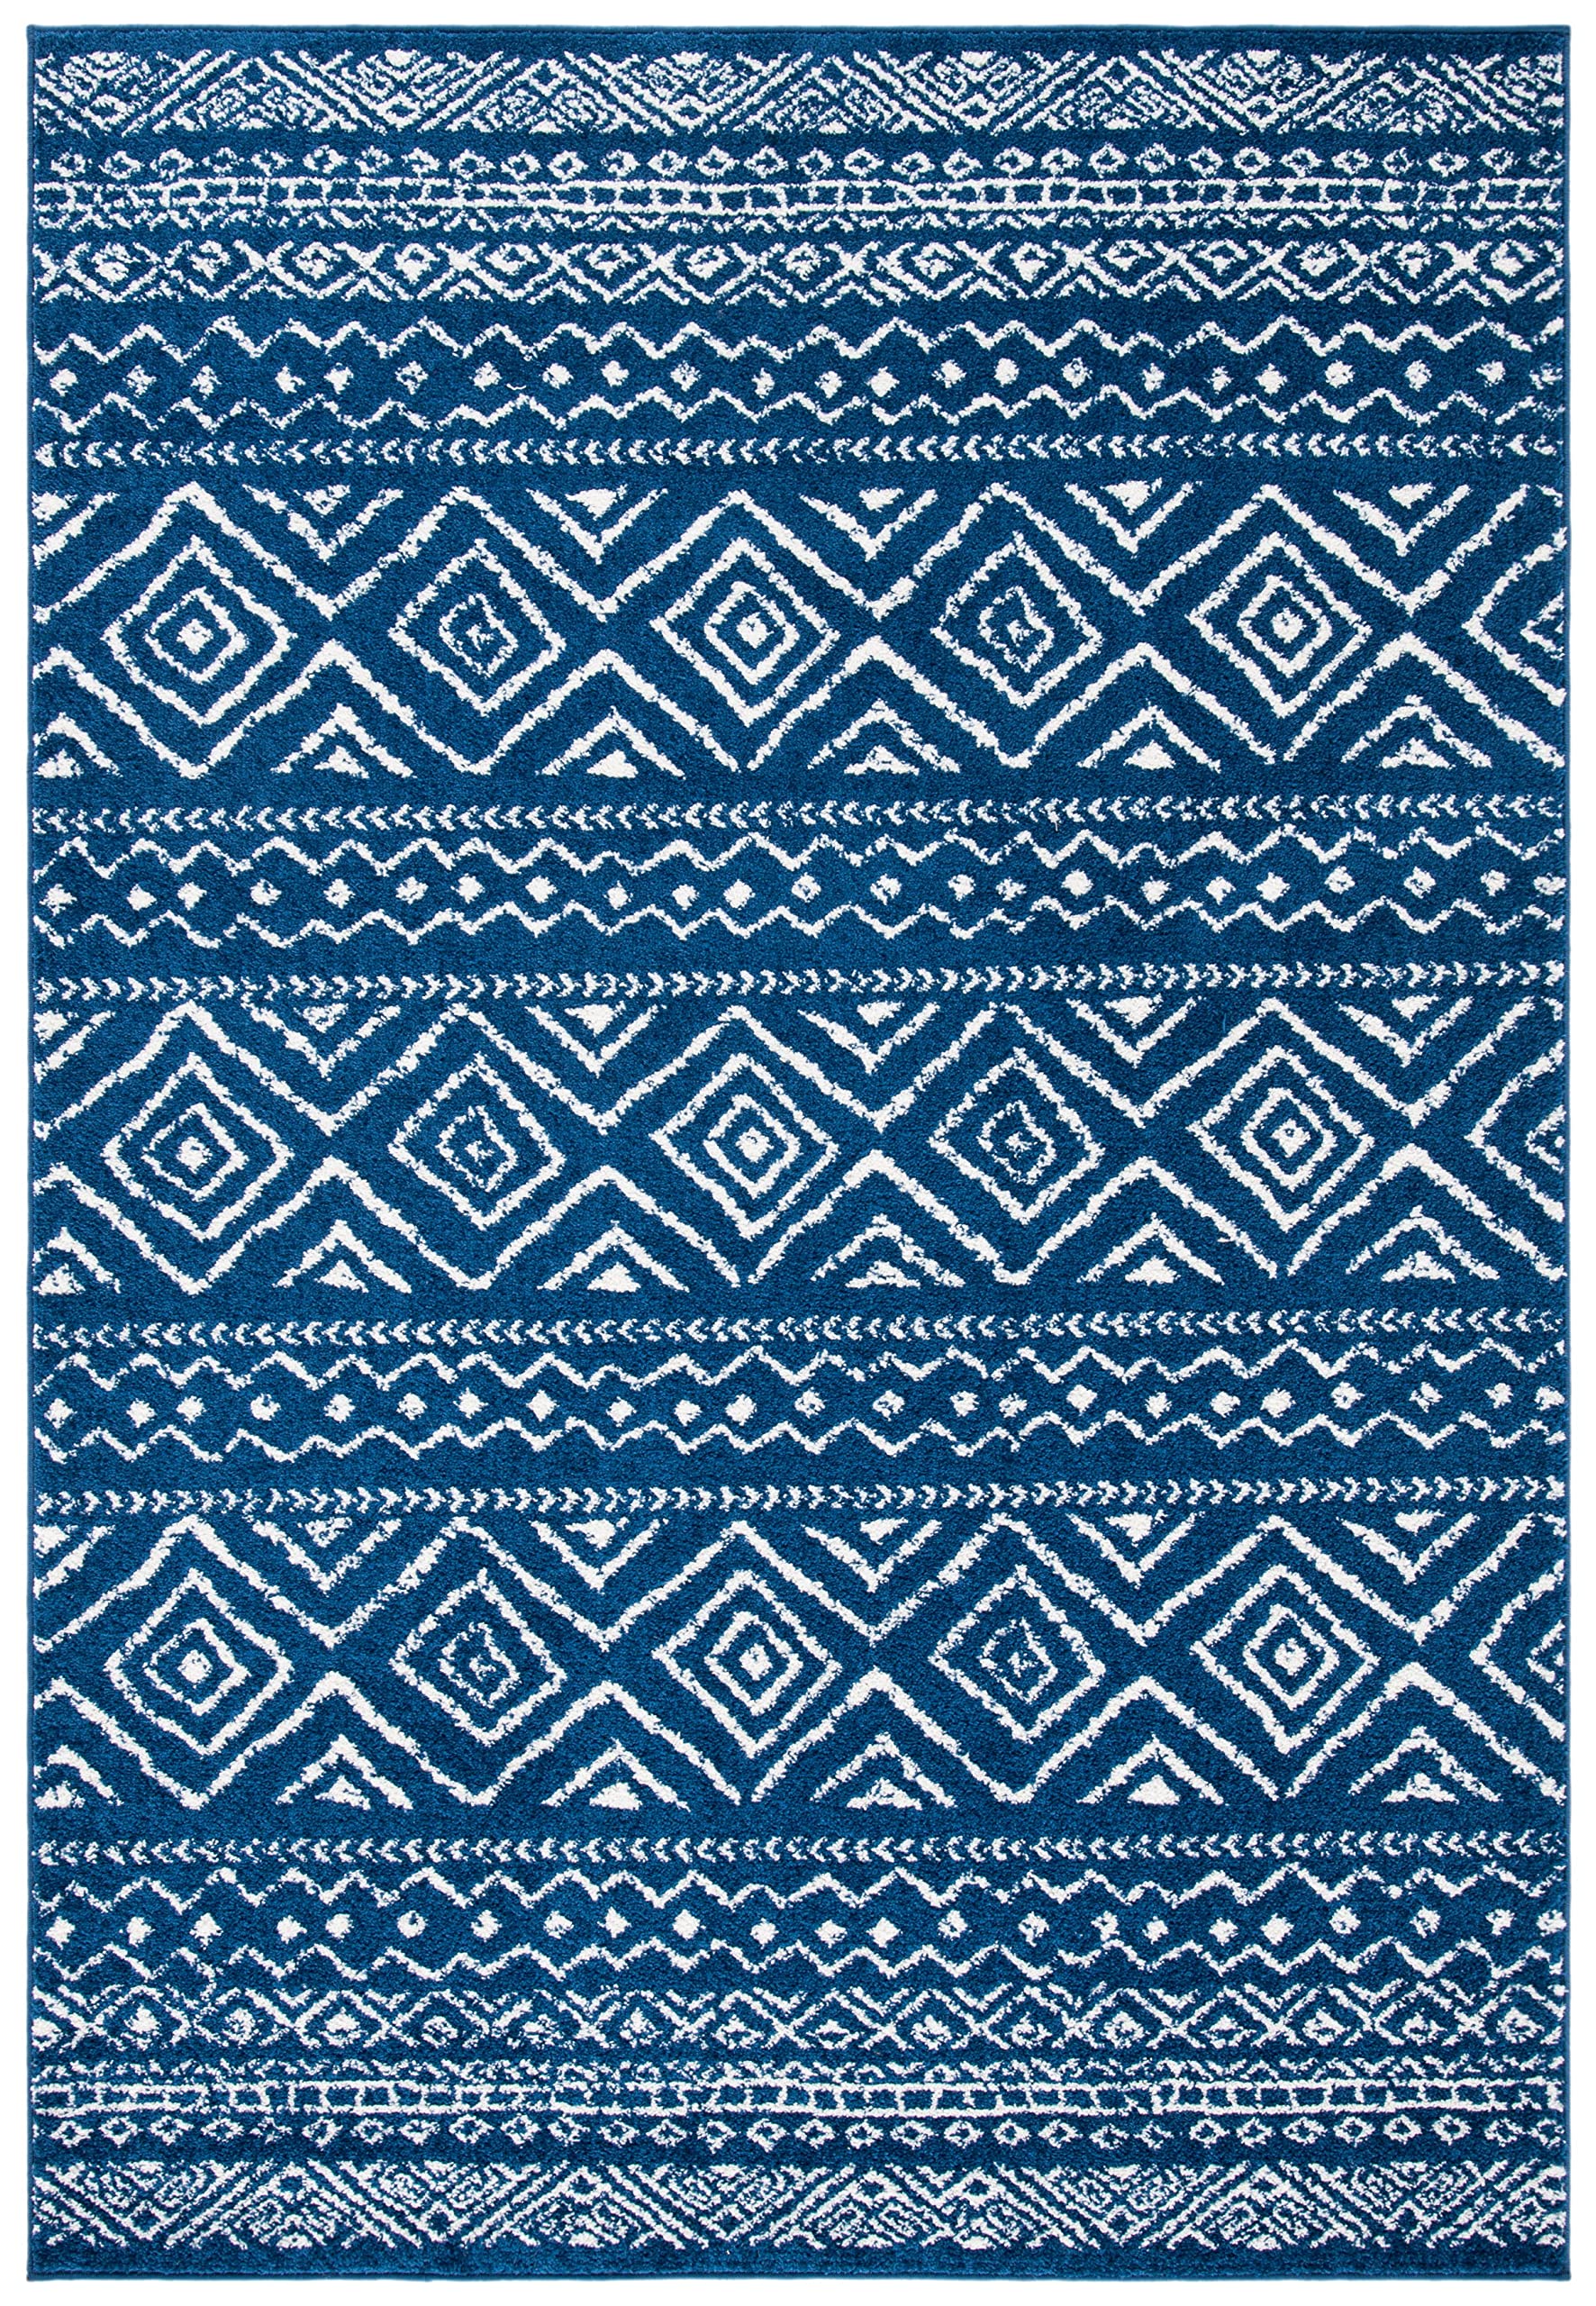 SAFAVIEH Tulum Collection Area Rug - 9' x 12', Navy & Ivory, Moroccan Boho Distressed Design, Non-Shedding & Easy Care, Ideal for High Traffic Areas in Living Room, Bedroom (TUL267N)